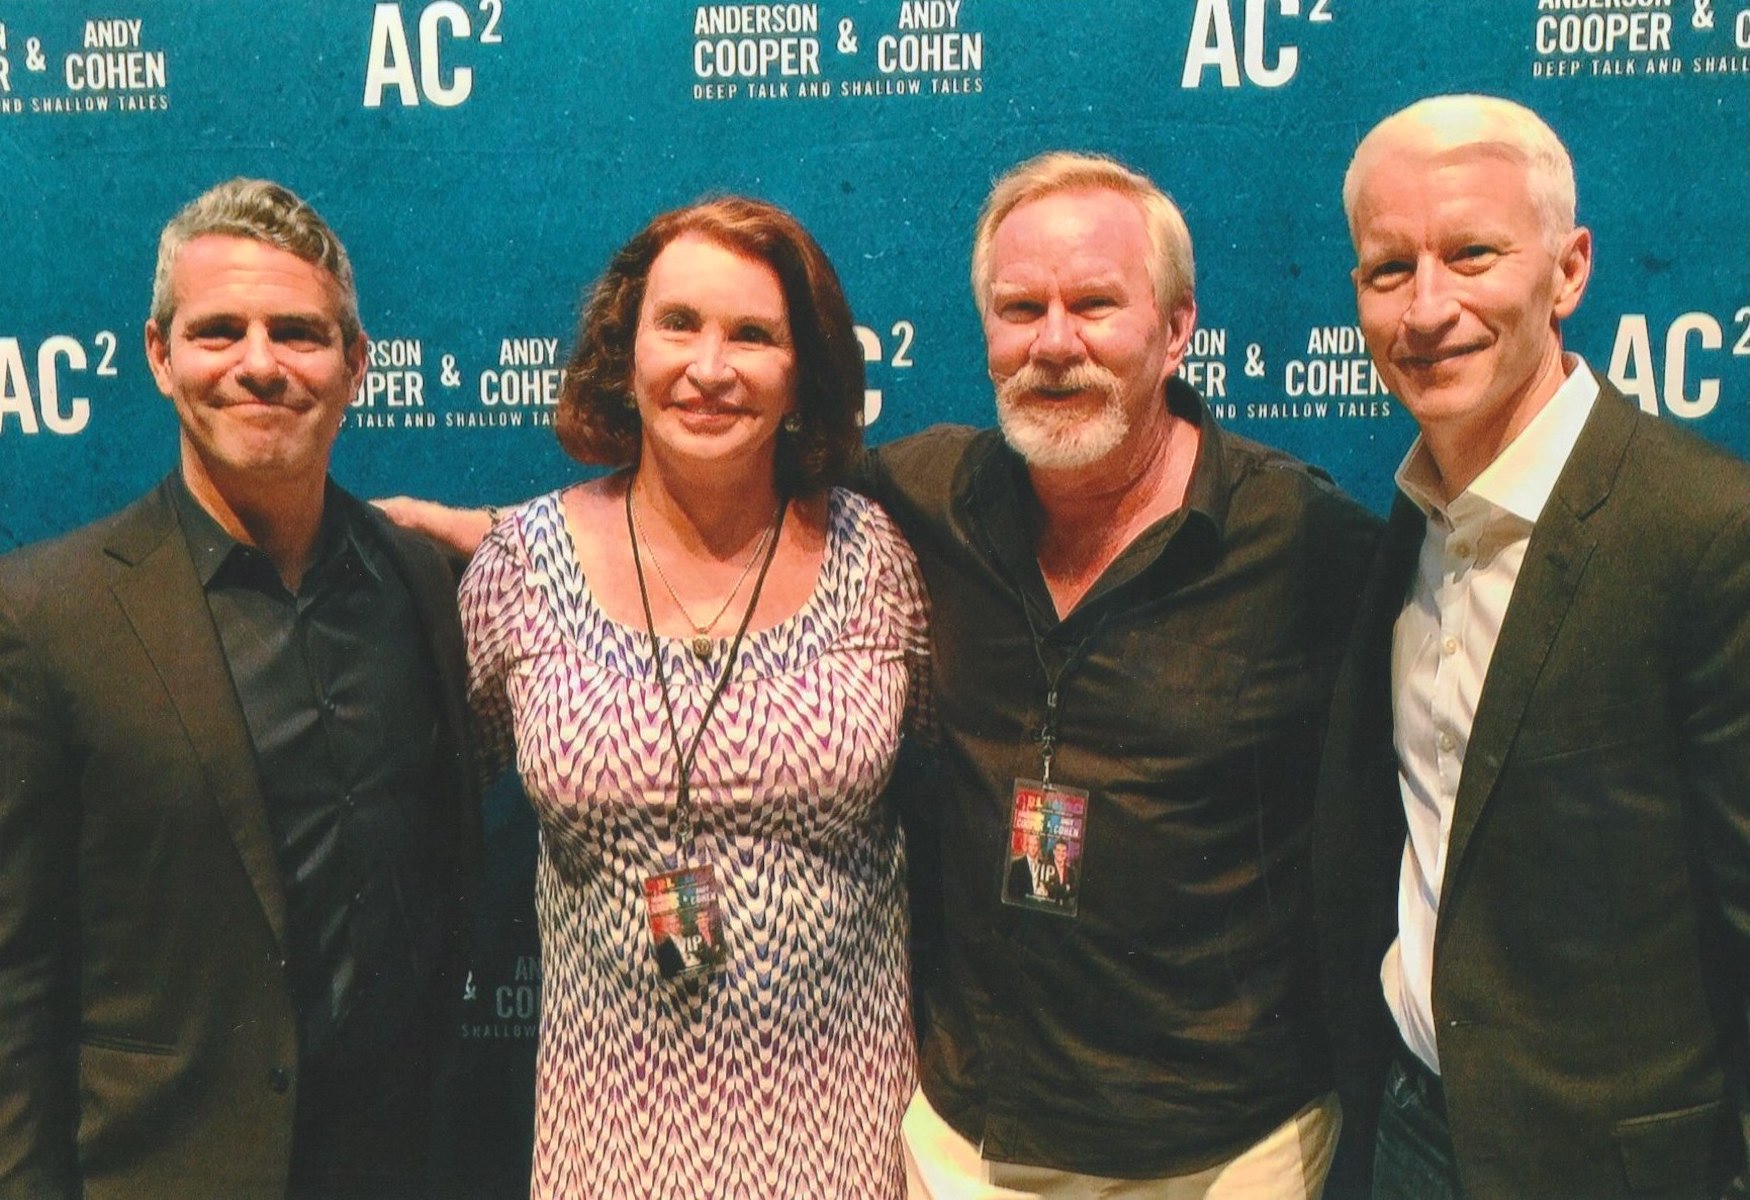 L-R: Andy Cohen, Gina Davis, Tom Dyer, and Anderson Cooper in front of the “Anderson Cooper & Andy Cohen: Deep Talks and Shallow Tales” promotional wall, Orlando, FL. Tom shares, “After the horrific Pulse massacre in 2016, in which 49 people lost their lives at an Orlando LGBTQ nightclub, Andy Cohen and Anderson Cooper brought their show to town to lift spirits. I’m pictured here with dear friend, Gina Davis, a remarkable transgender activist.” Photo courtesy of Tom Dyer.